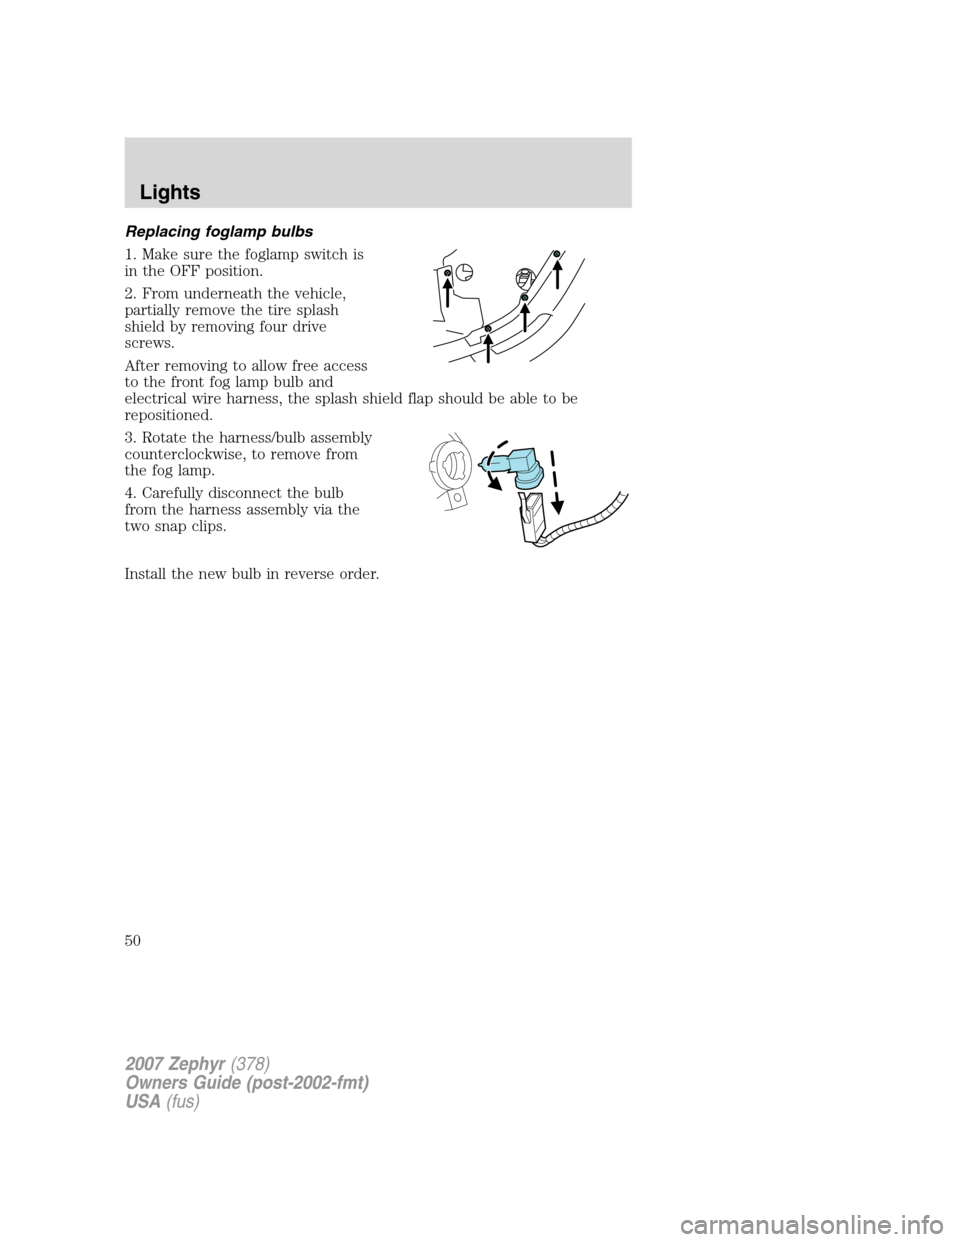 LINCOLN MKZ 2007 Service Manual Replacing foglamp bulbs
1. Make sure the foglamp switch is
in the OFF position.
2. From underneath the vehicle,
partially remove the tire splash
shield by removing four drive
screws.
After removing to